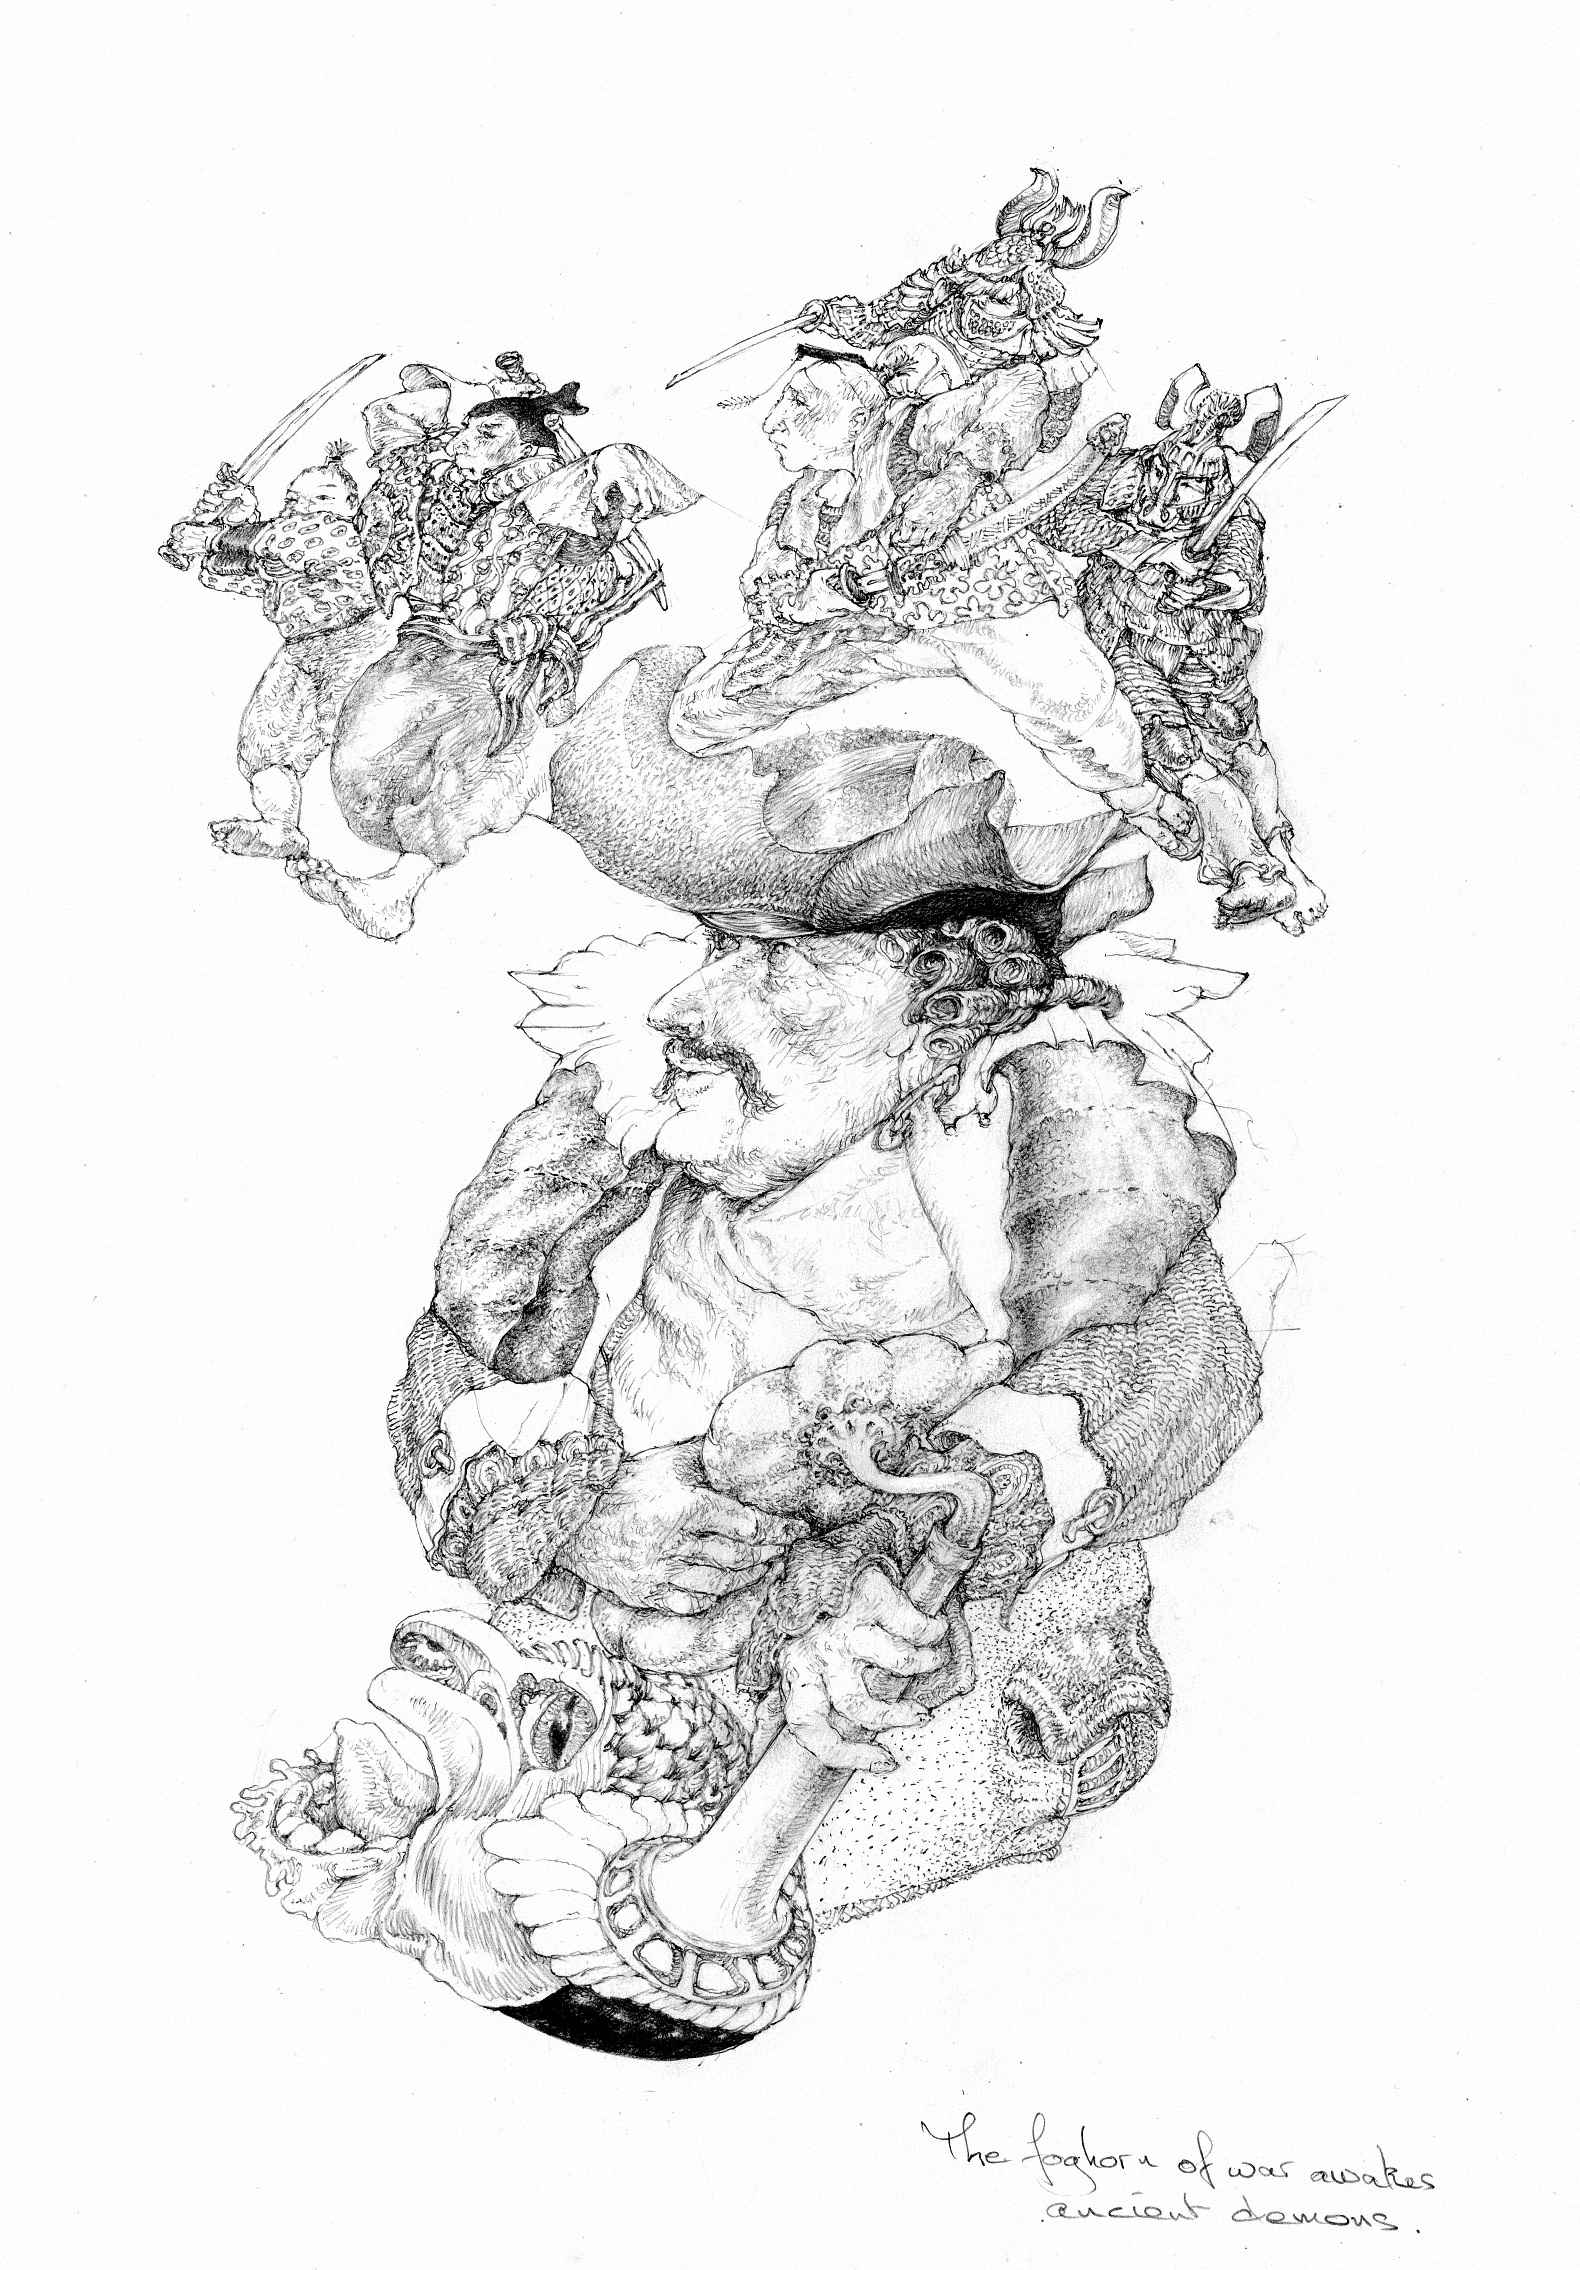 01. Recent drawings series.
<strong>The foghorn of war, awakens ancient demons.</strong>
Several Samurai are called into action by the noise of war. 
(2b Pencil drawing, A3. 180grm. Canson “Bristol”)